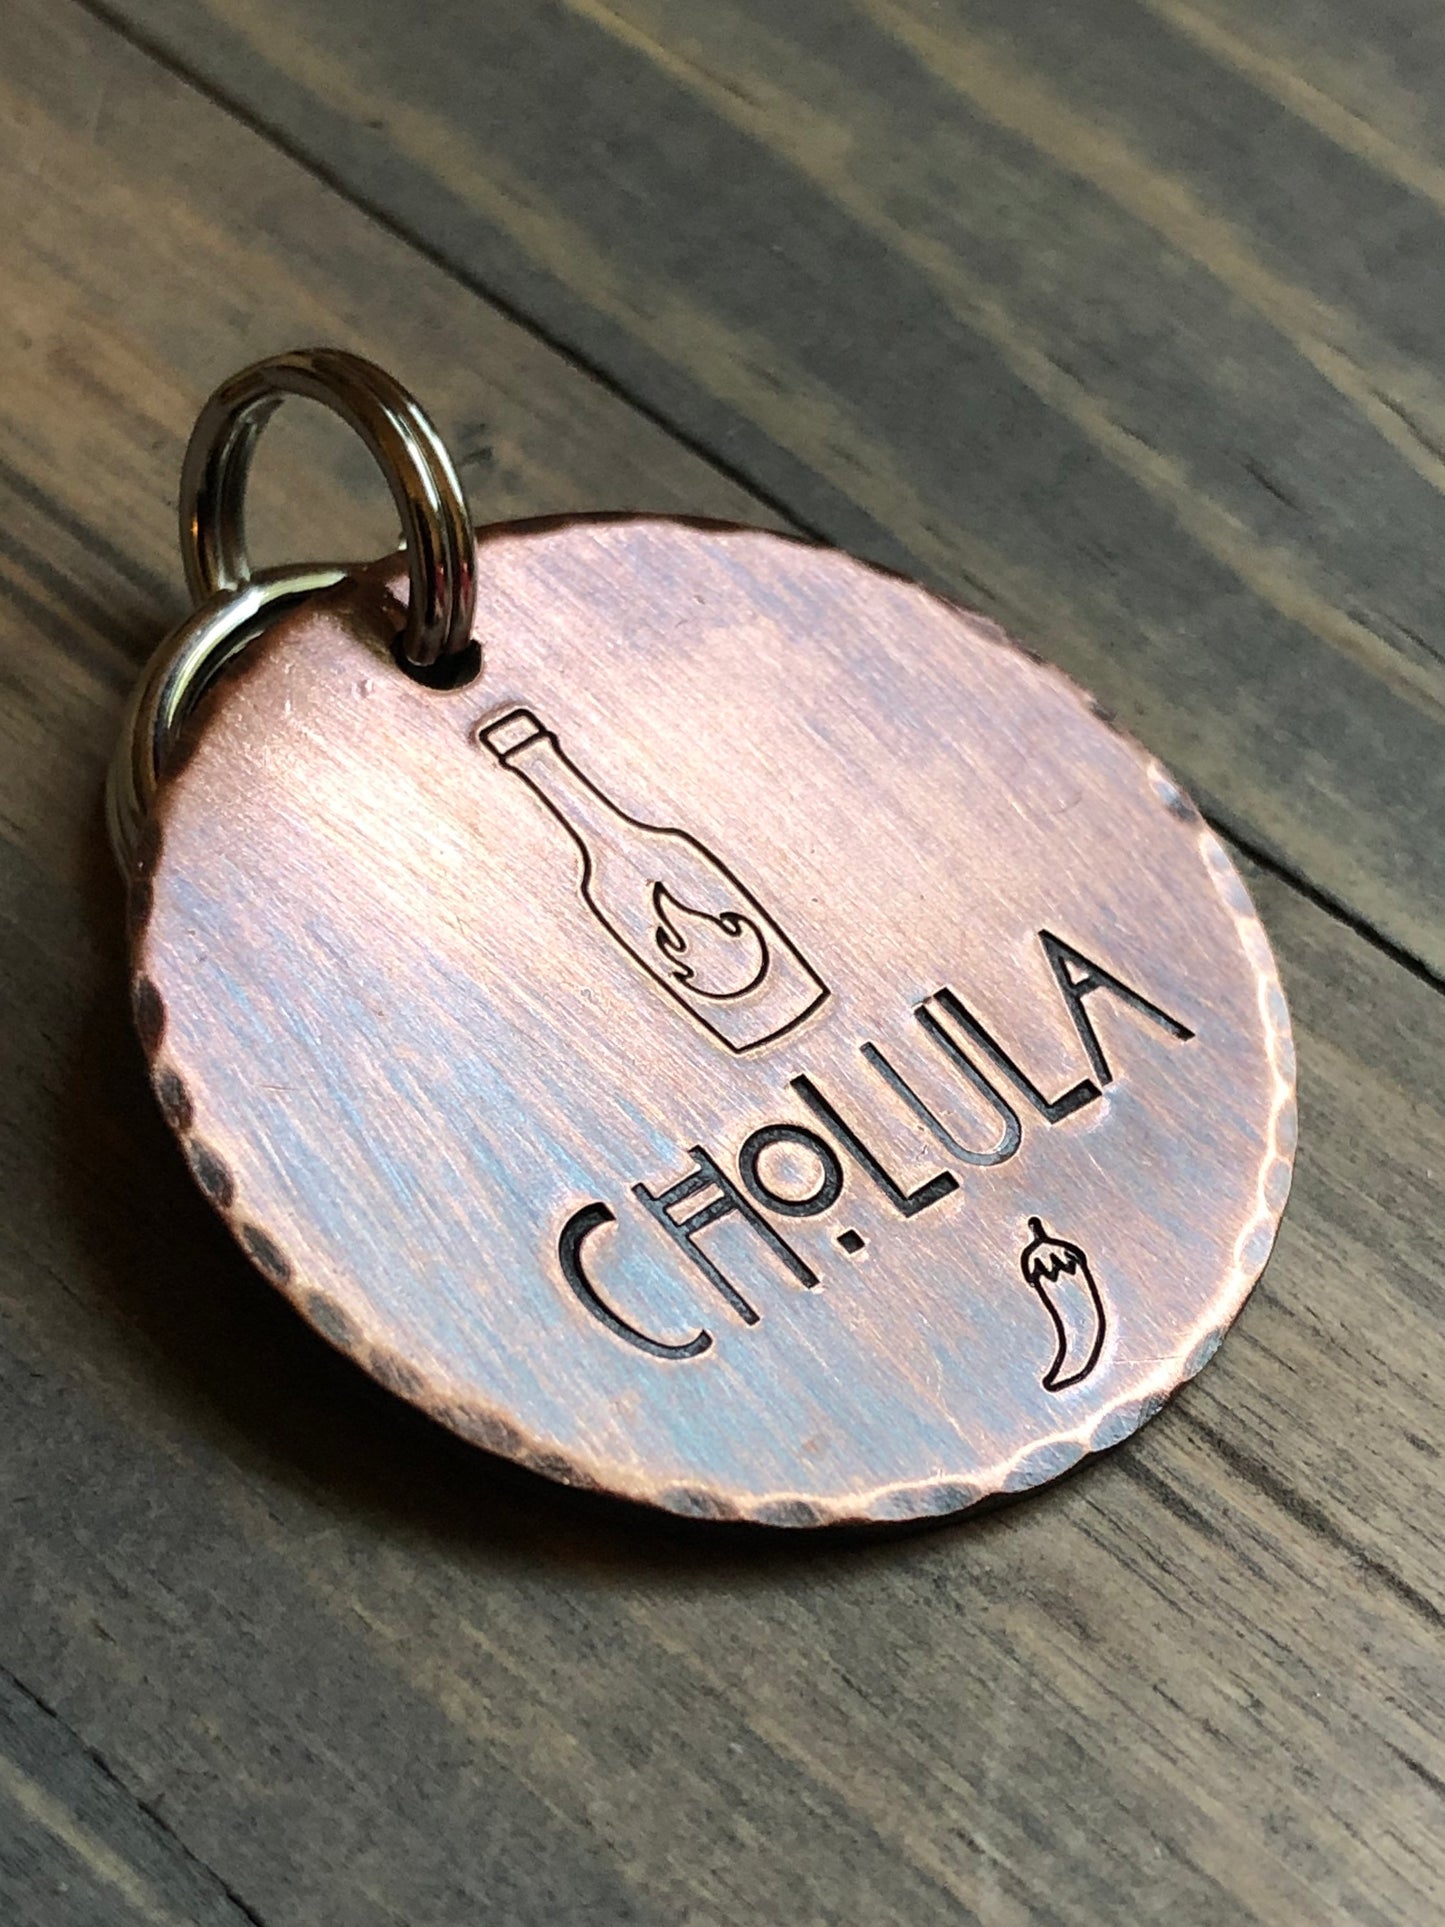 Name Tag for Dog, Hand Stamped Pet ID, Hot Sauce Dog Tag, Dog Tag with Pepper